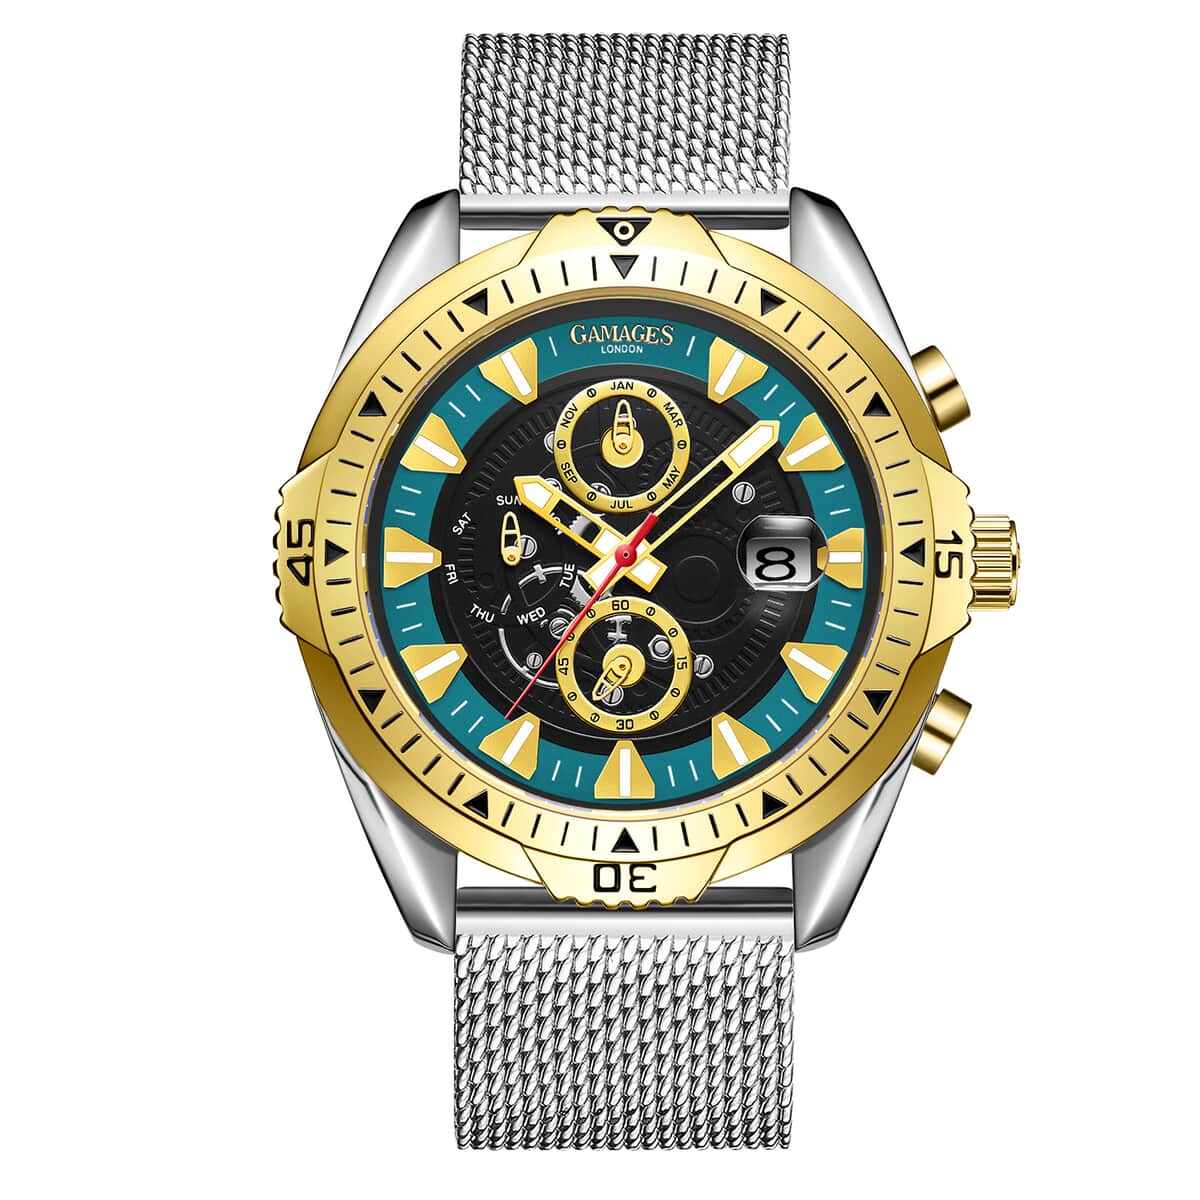 GAMAGES OF LONDON Limited Edition Hand Assembled Vanguard Automatic Movement Mesh Strap Watch in ION Plated Gold and Stainless Steel (45mm) with FREE GIFT PEN image number 0